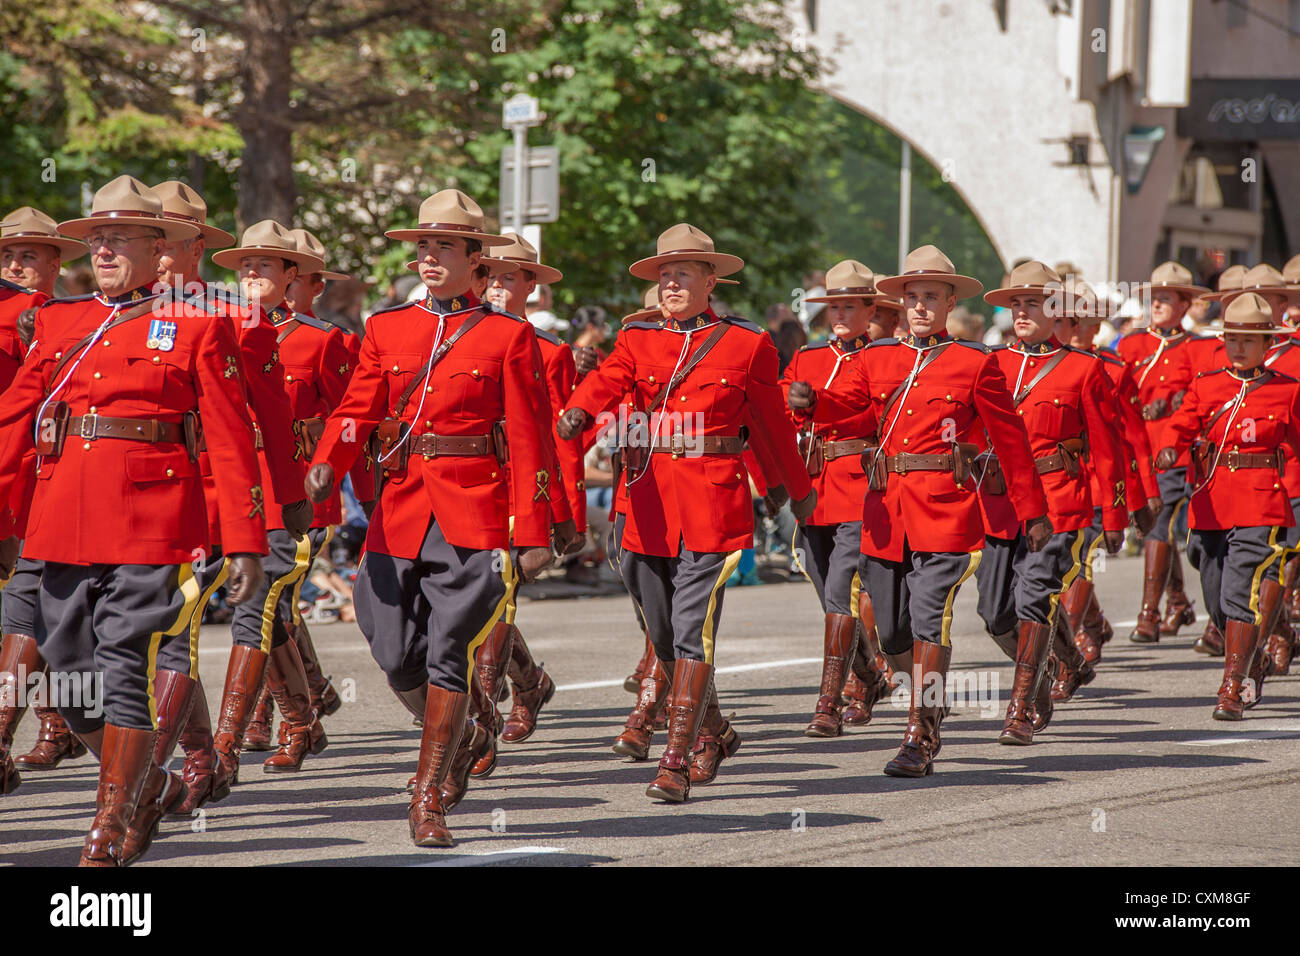 Royal Canadian Mounted police marching at the Calgary Stampede celebration opening parade Stock Photo